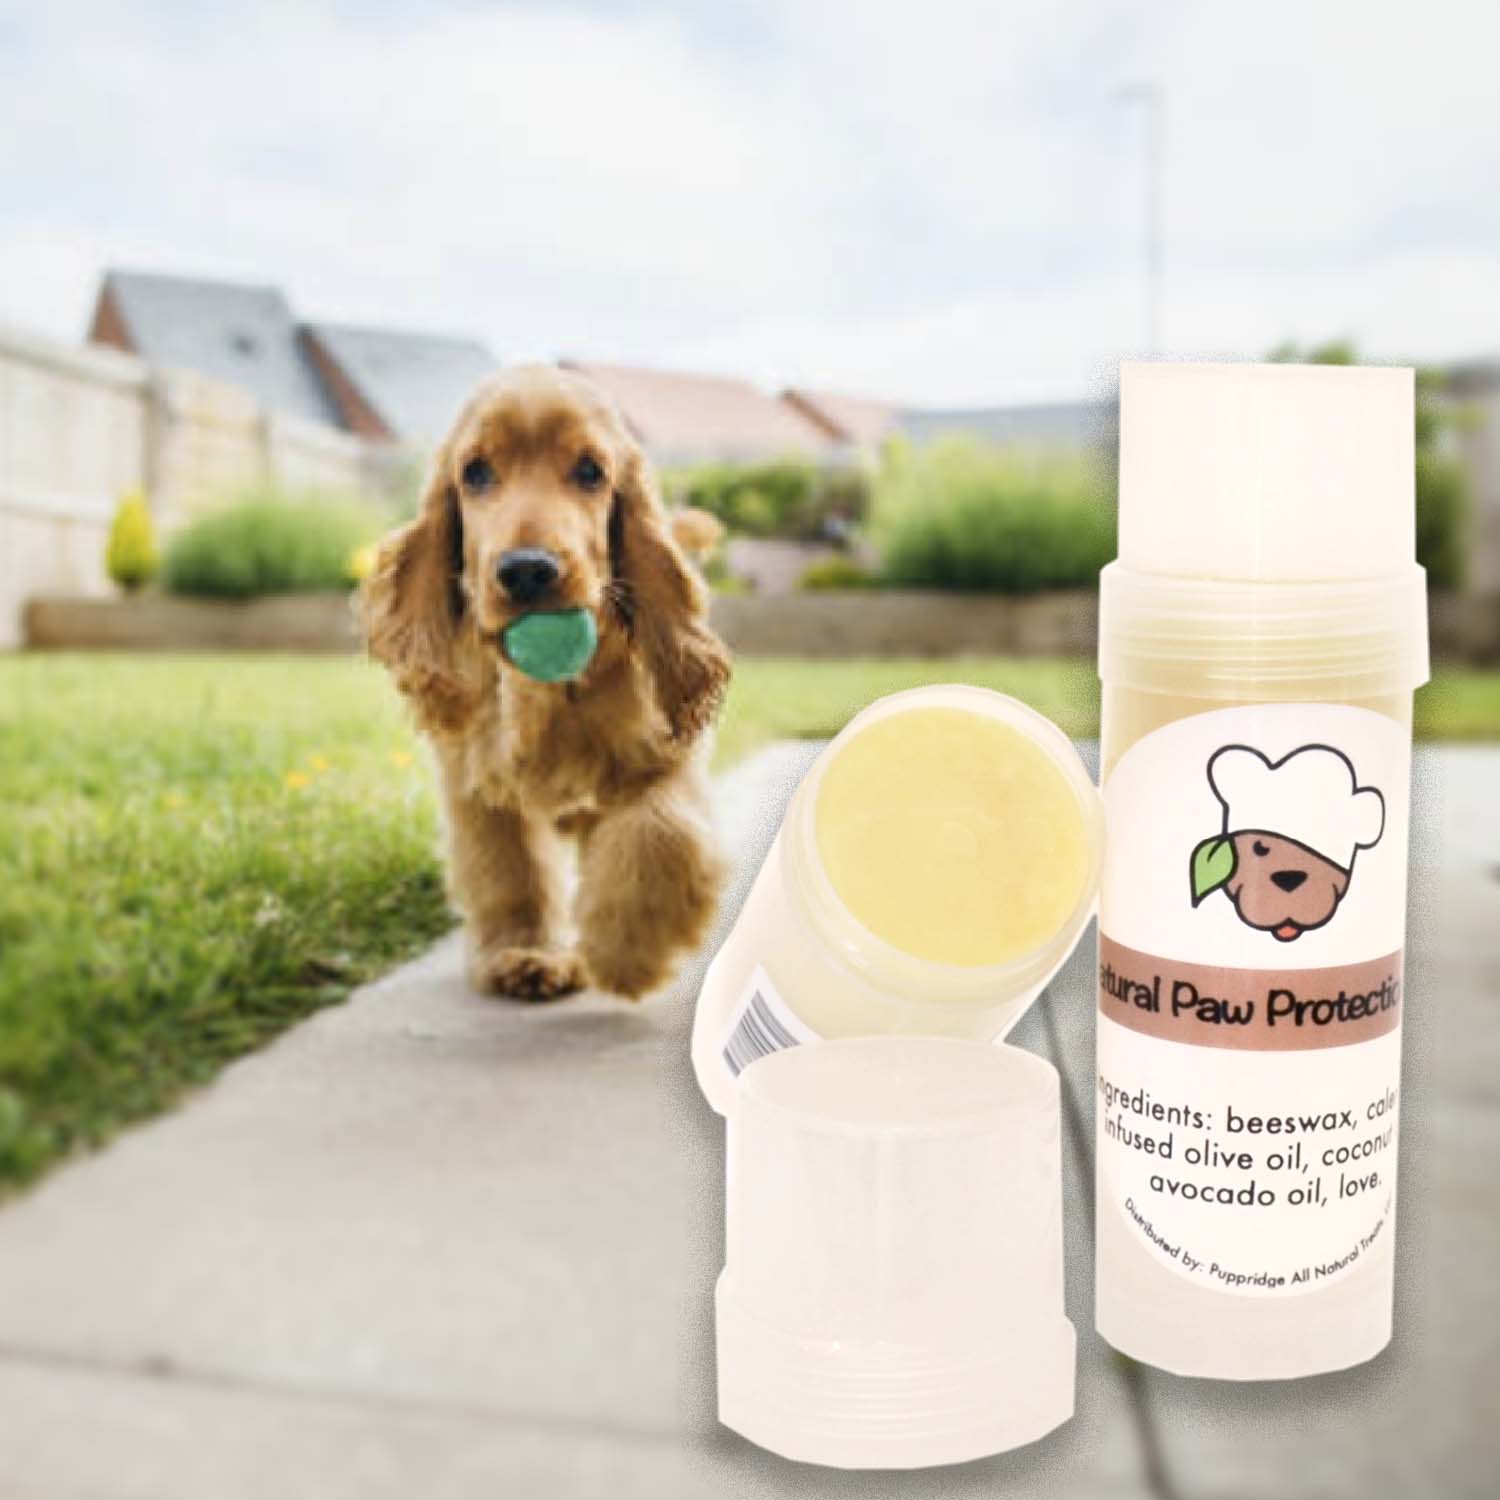 Natural dog paw protection wax tube in foreground. Dog holding a green ball in mouth is walking on a sidewalk in the background.